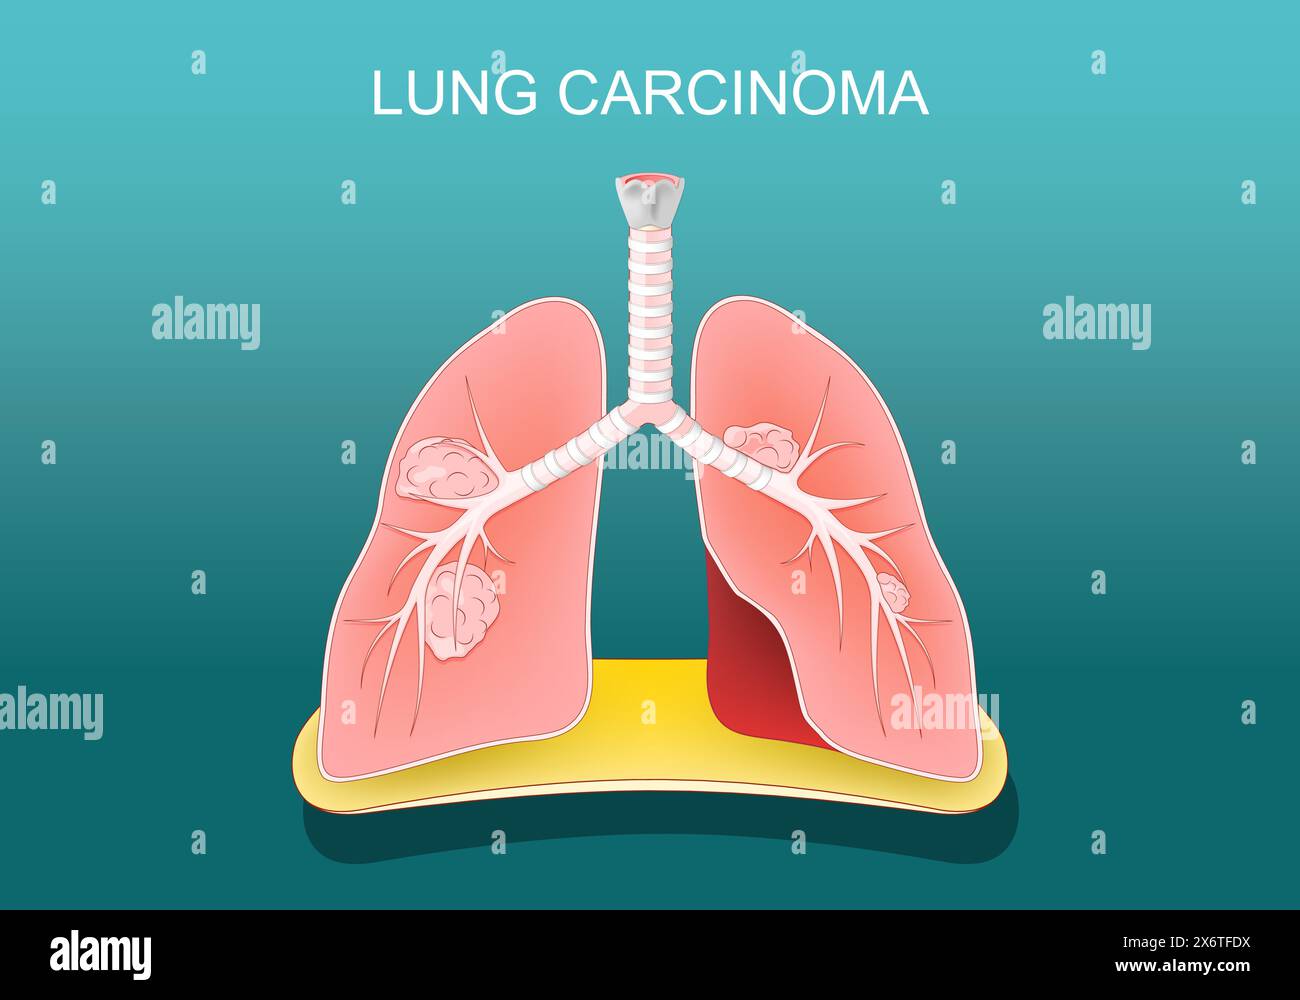 Lung carcinoma. Lung cancer. Tumors metastasize, spreading to other parts of the body. Vector poster. Isometric Flat illustration. Stock Vector